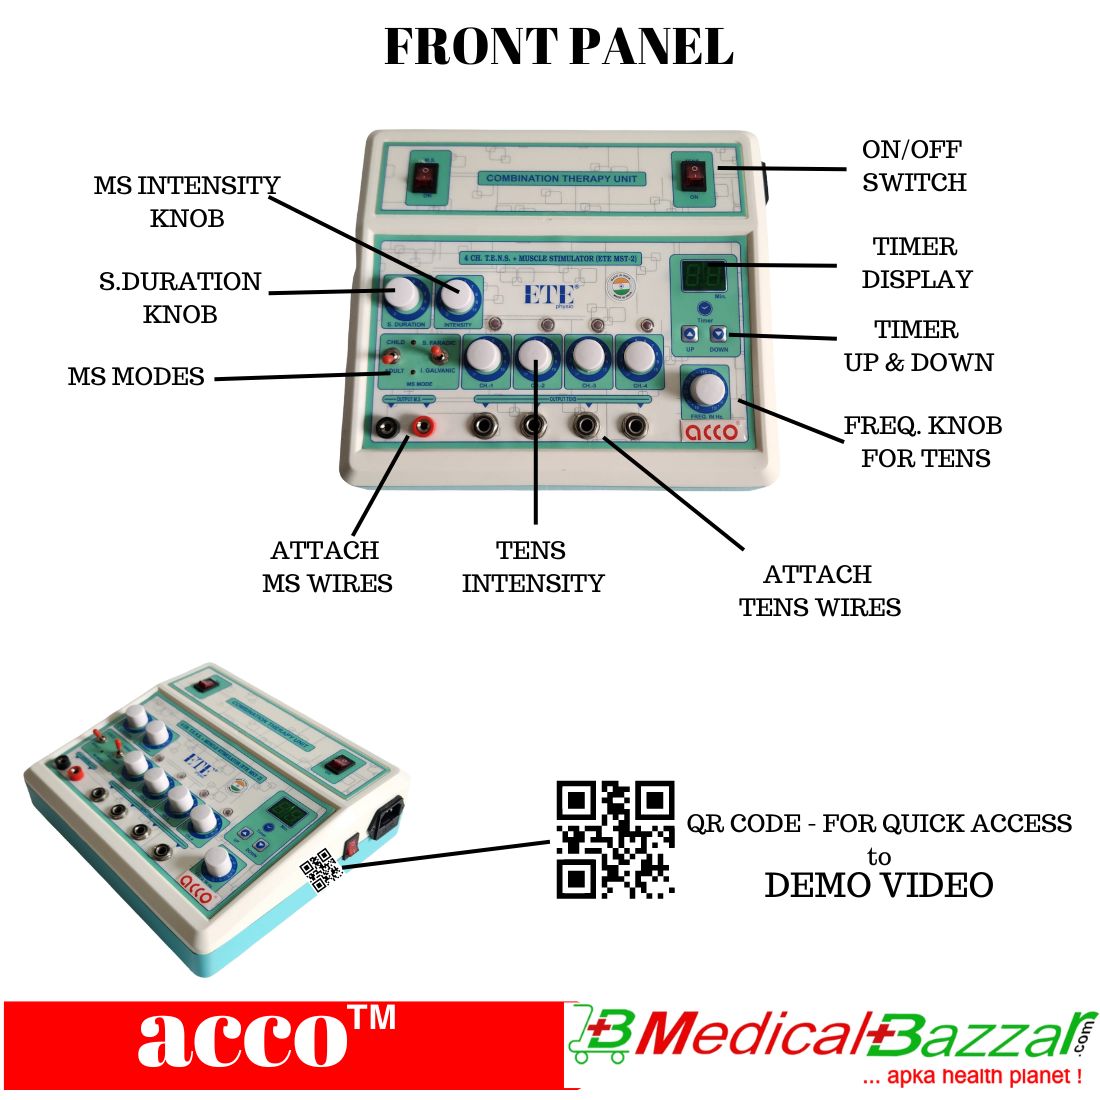 acco 4 Channel Tens Machine with Muscle Stimulator